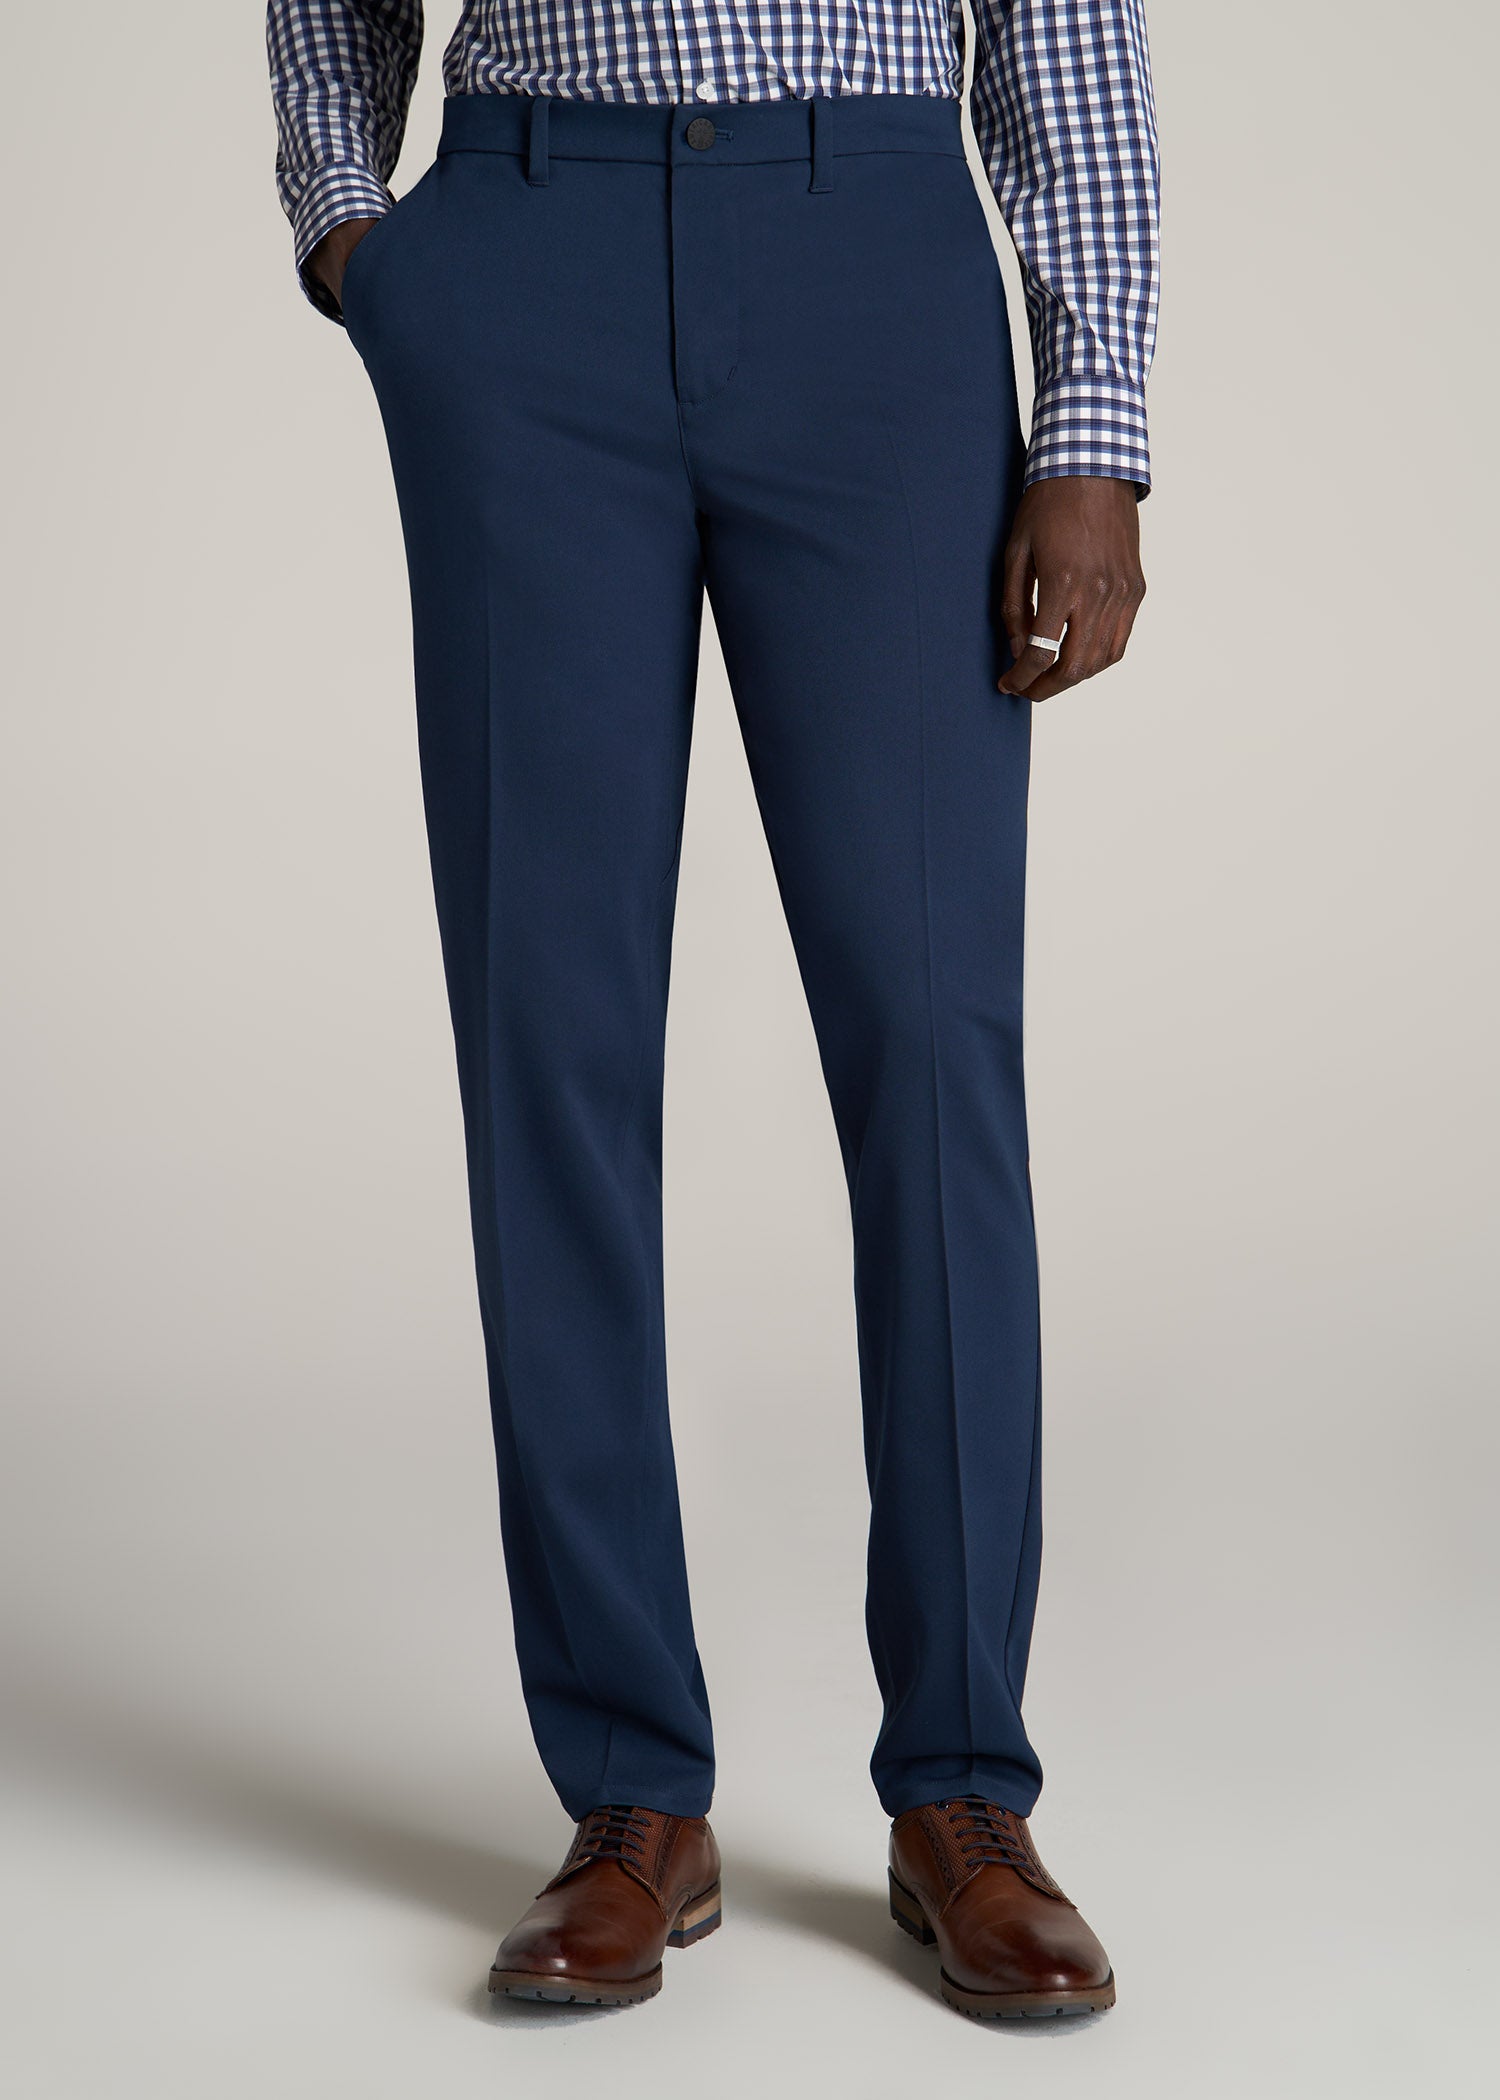 tapered dress pants